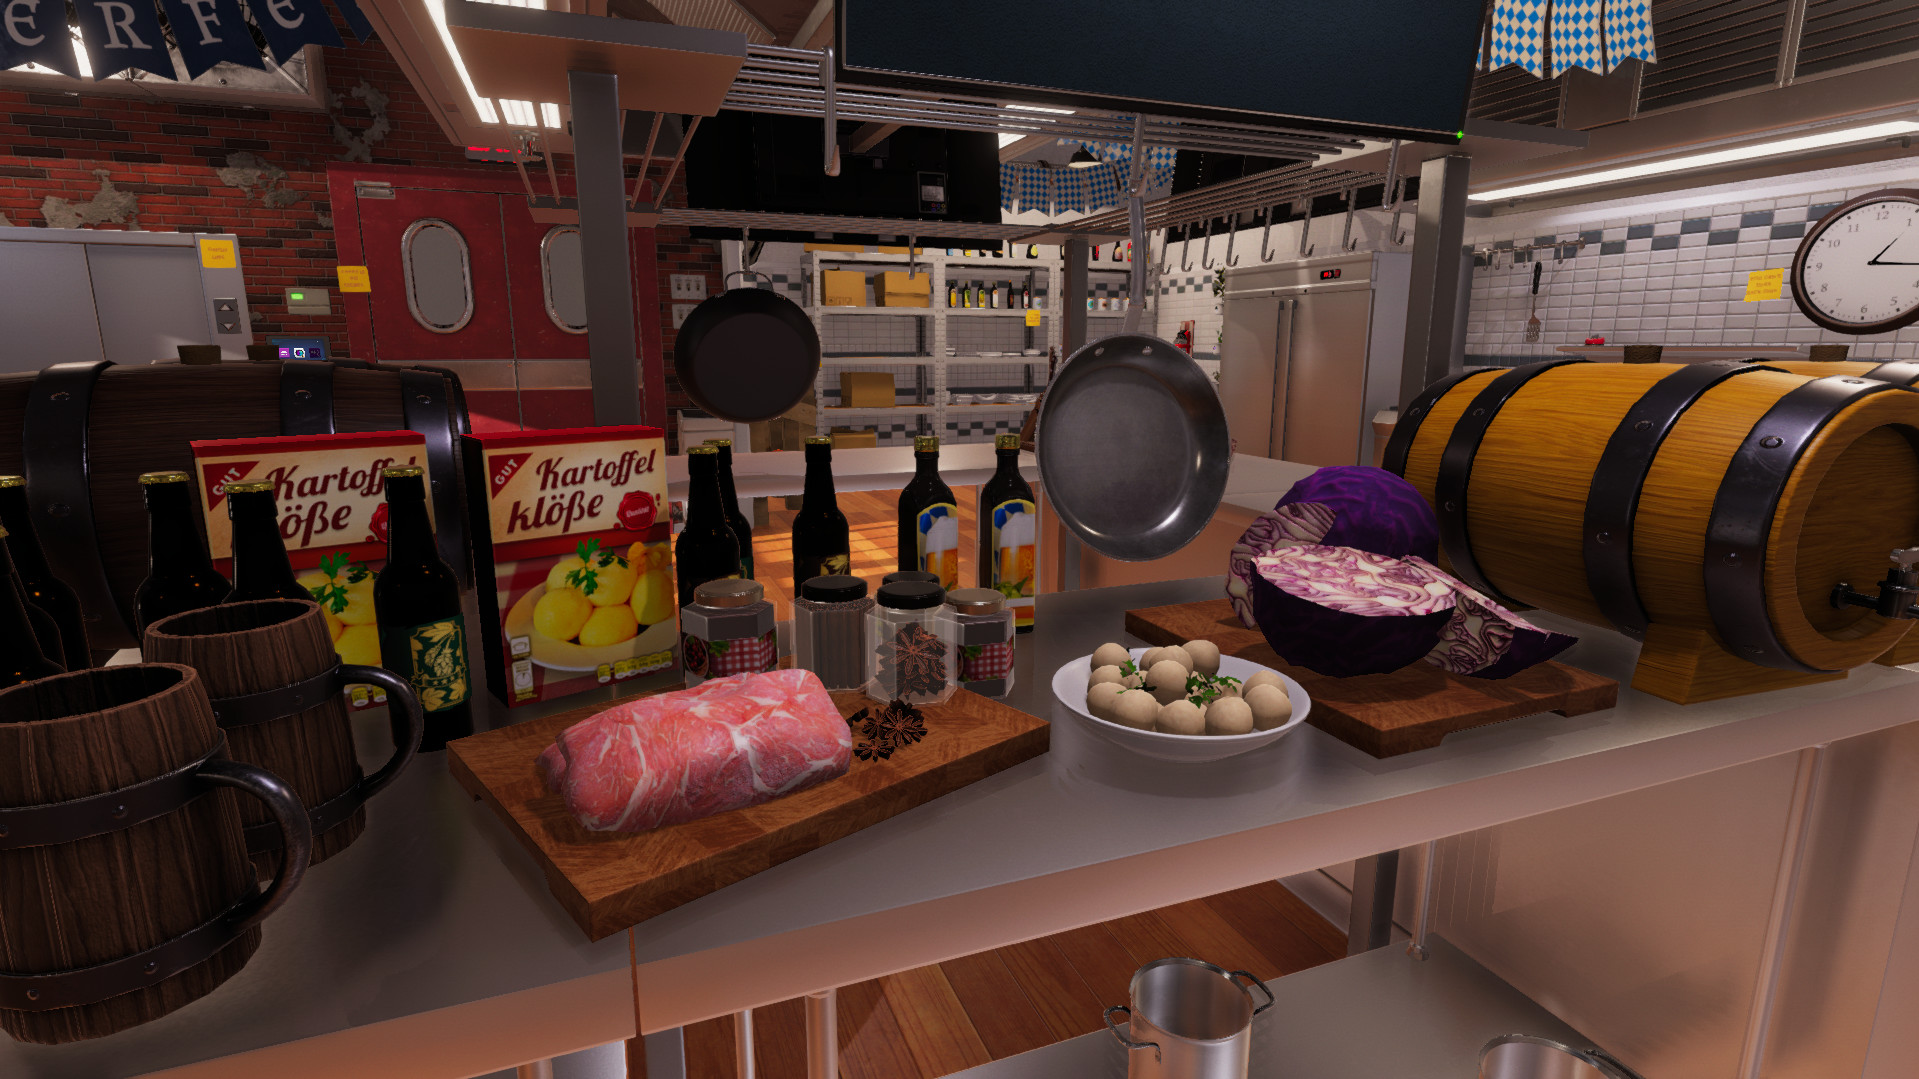 Cooking Simulator Free Download for PC